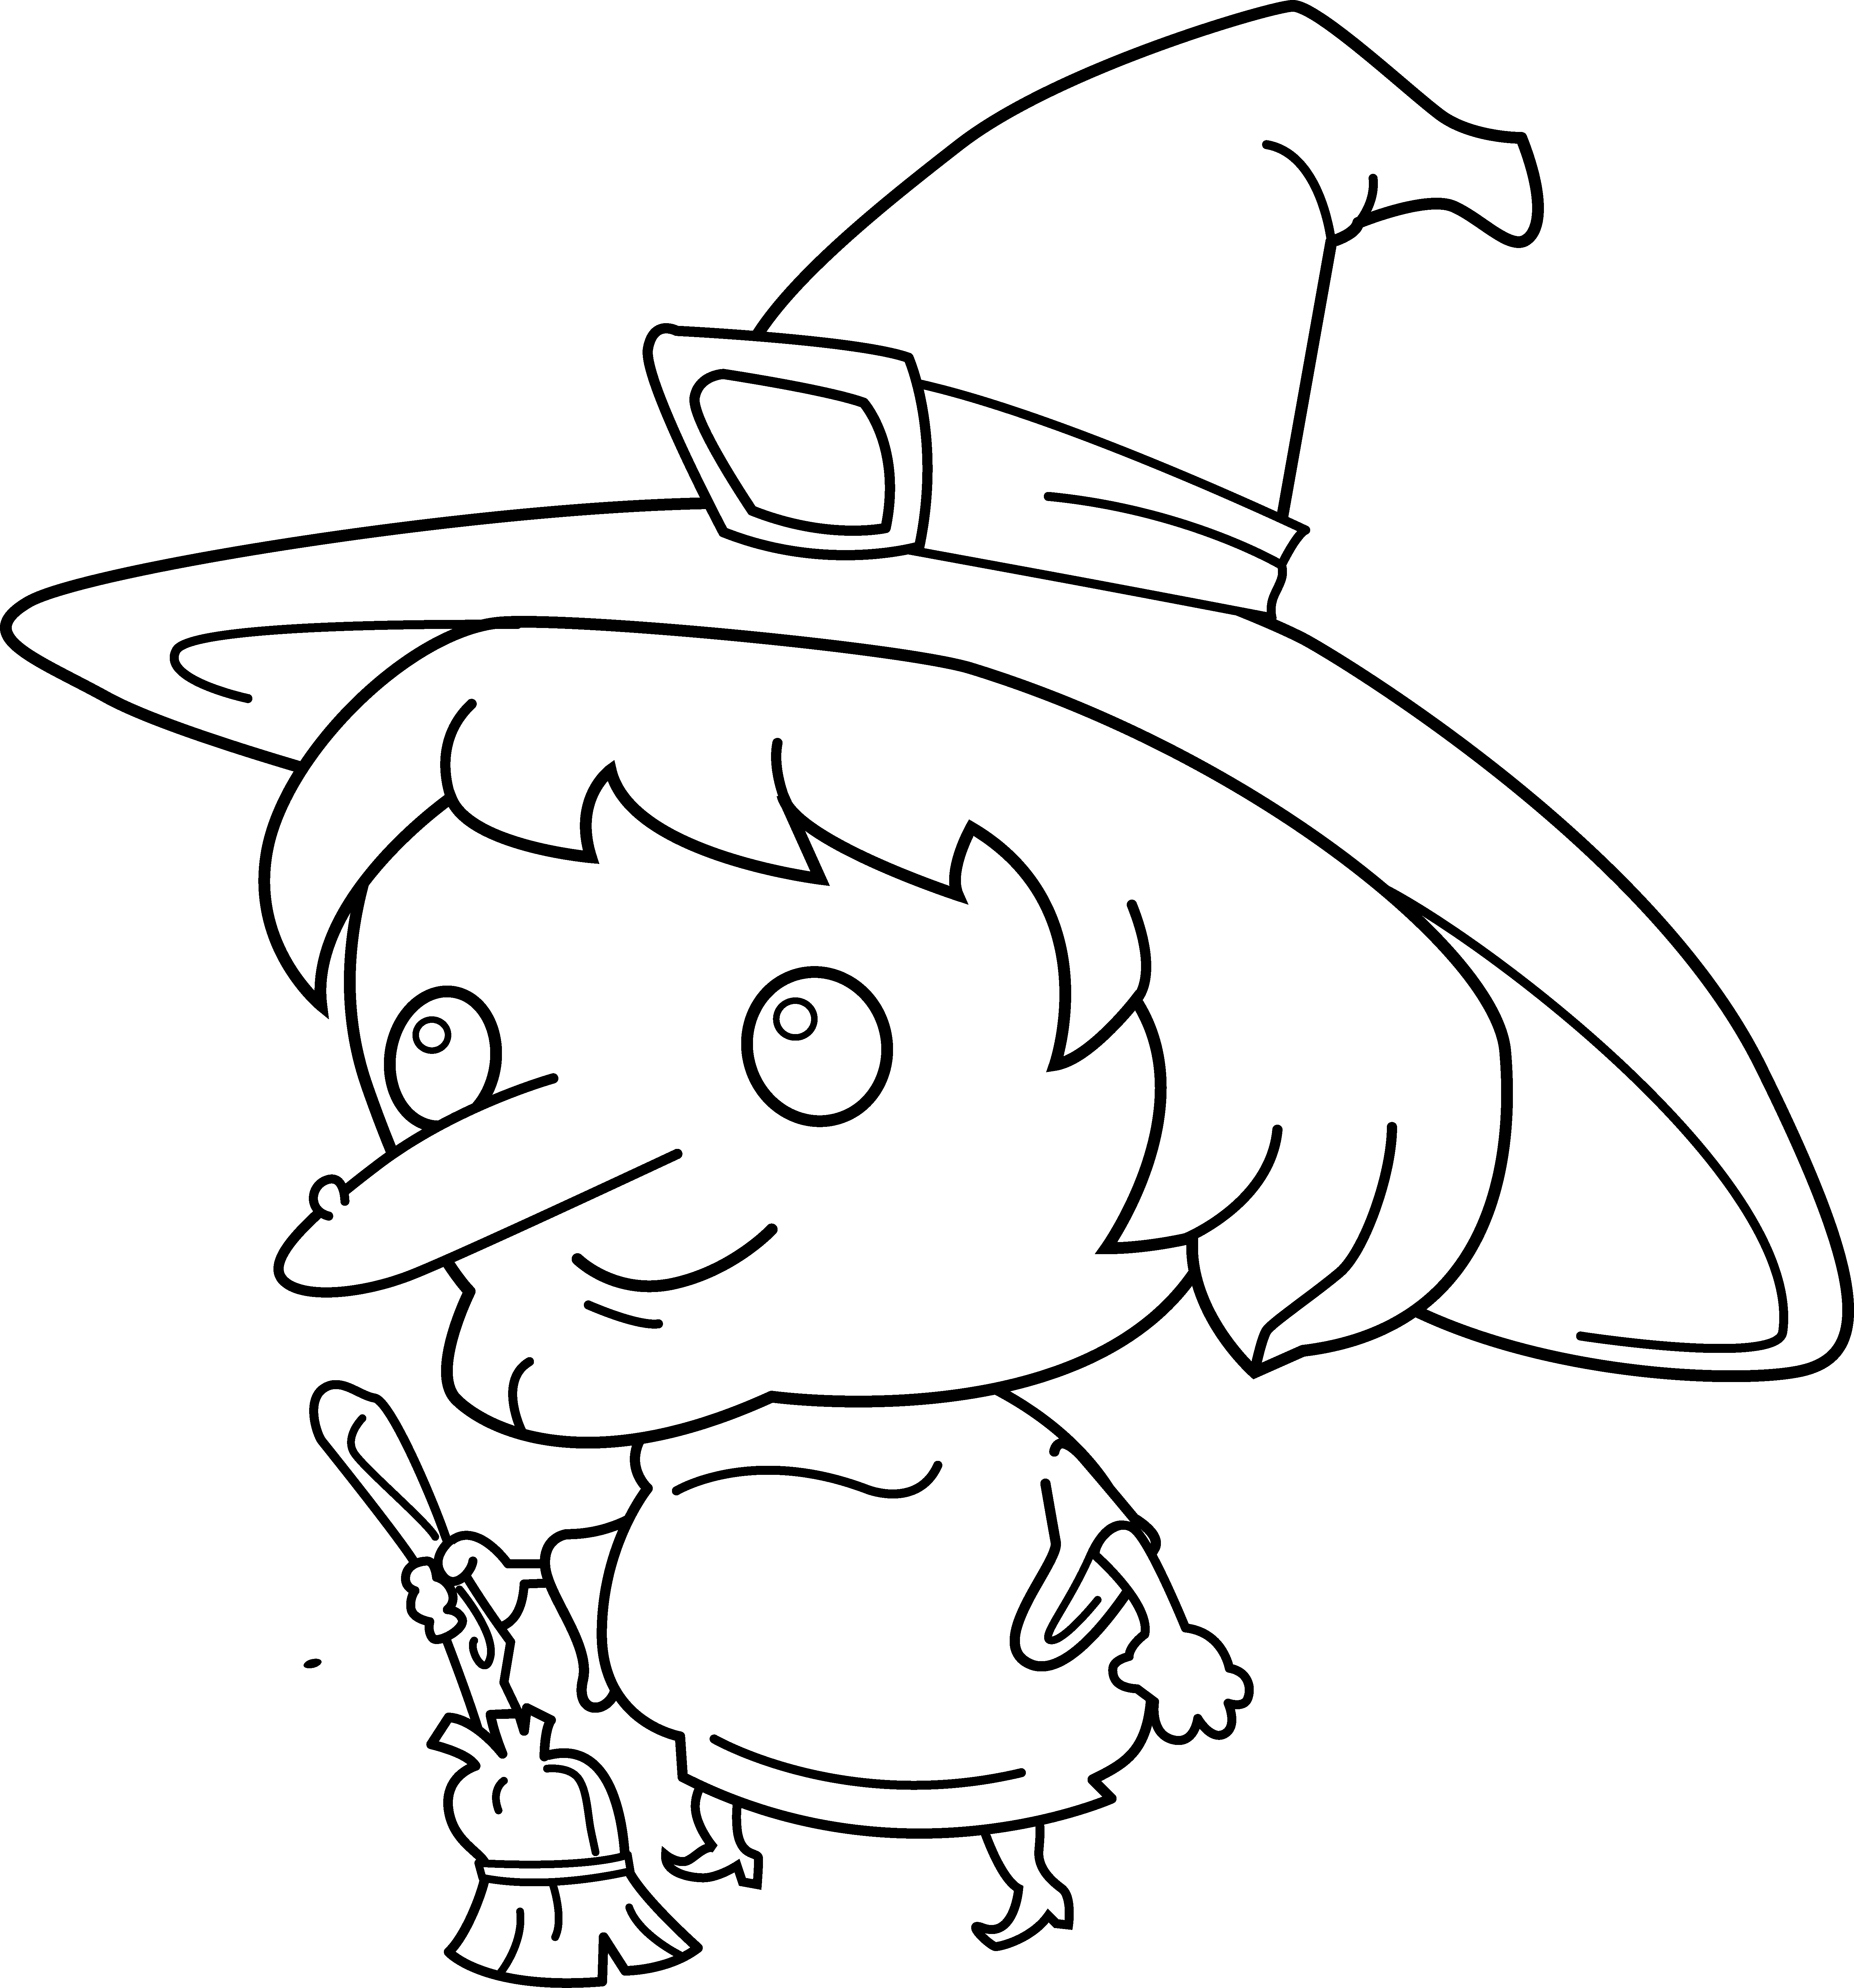 Free Witch On A Broomstick Clipart, Download Free Witch On A Broomstick